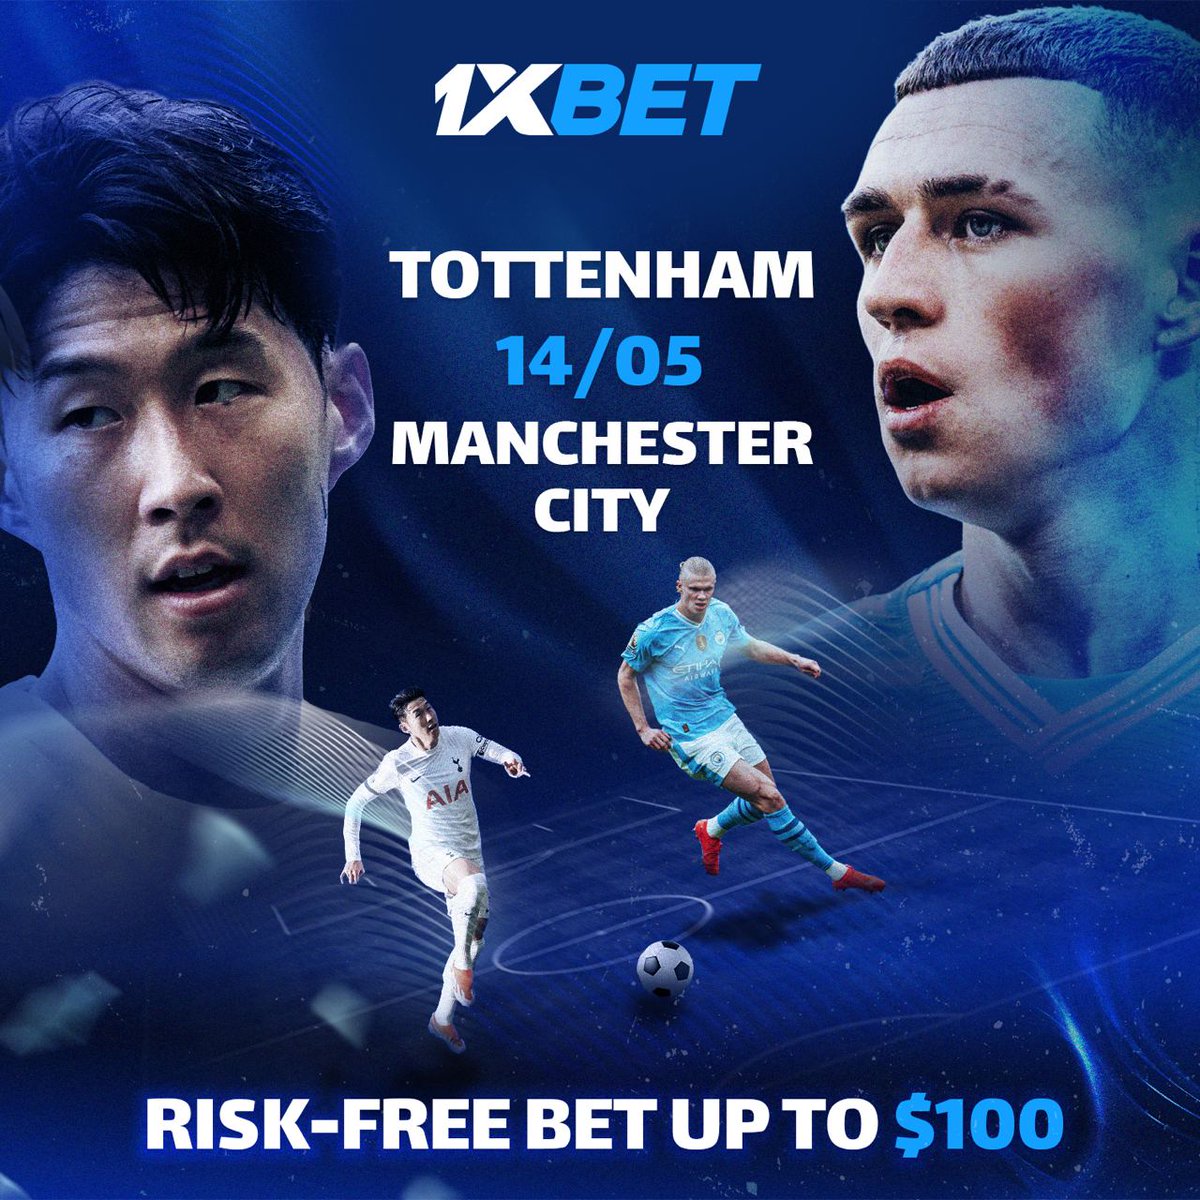 Manchester City are two wins away from winning their fourth Premier League title in succession - a feat not even the great Manchester United and Liverpool sides managed. Will Tottenham stop them? Make your predictions on tapxlink.com/GABRIELMO_link Promocode: GABRIELMO